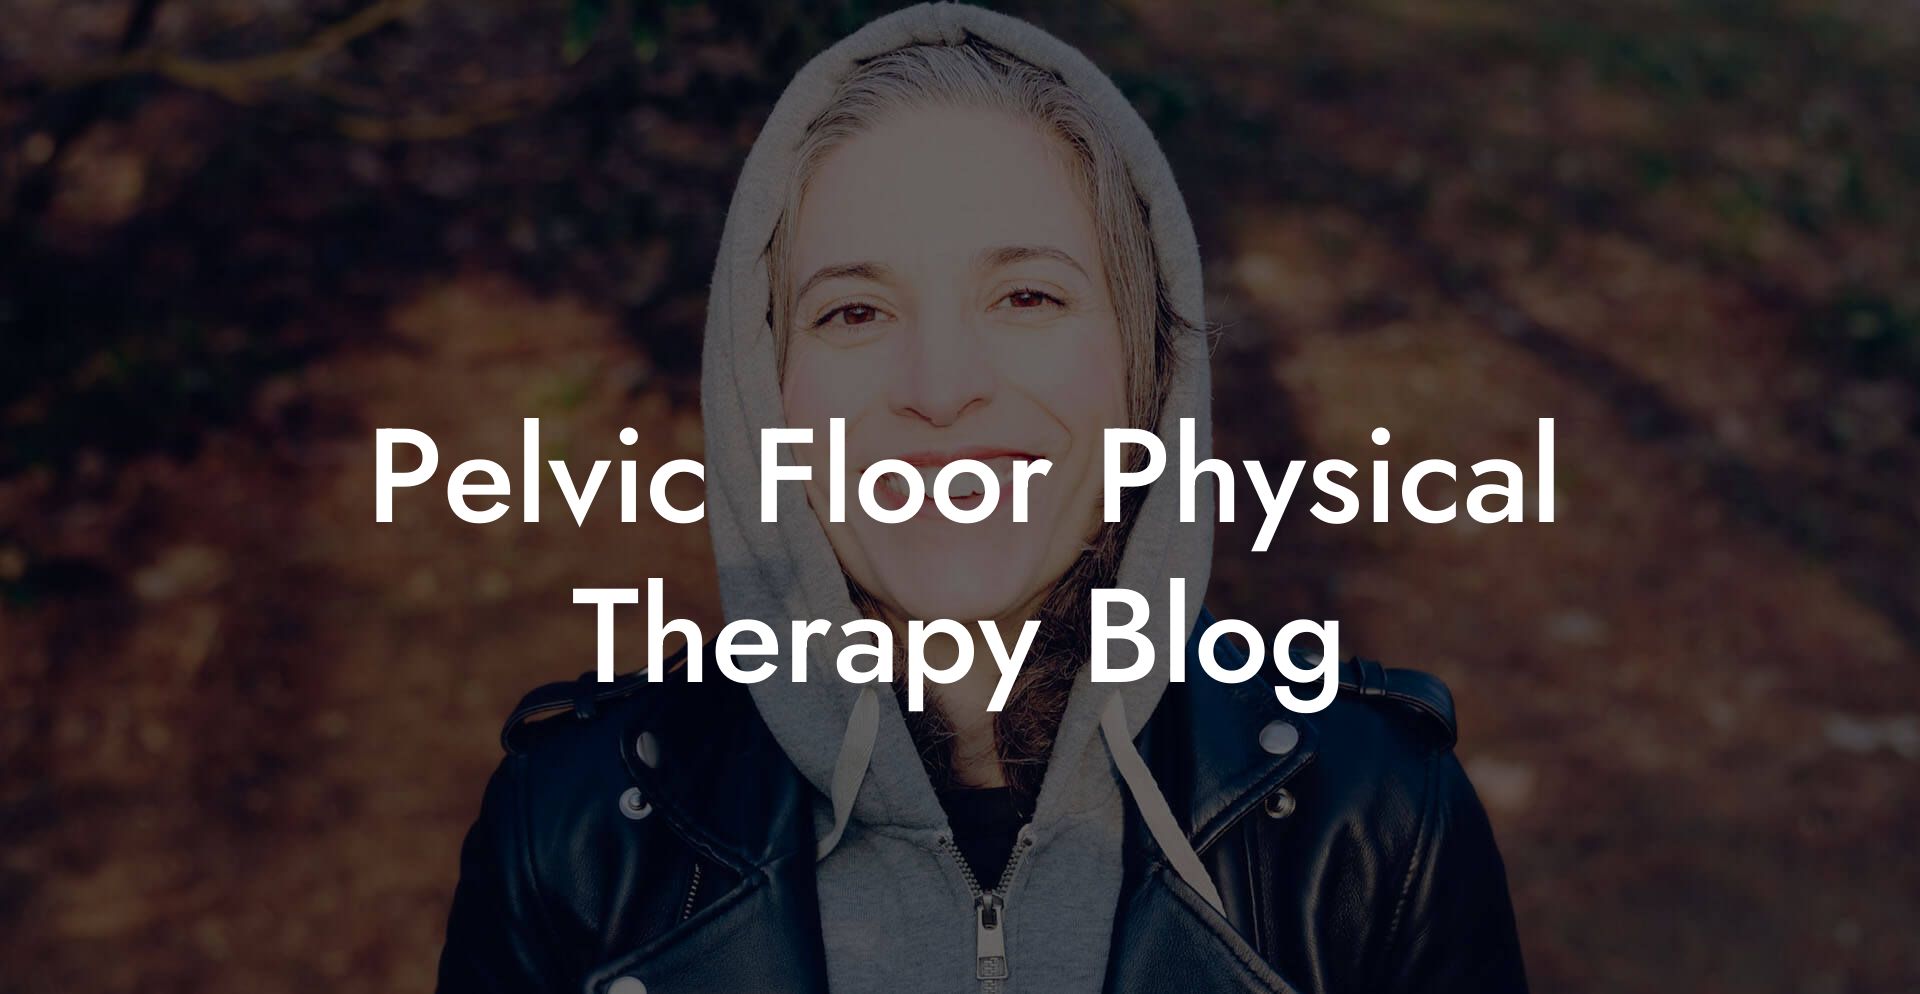 Pelvic Floor Physical Therapy Blog